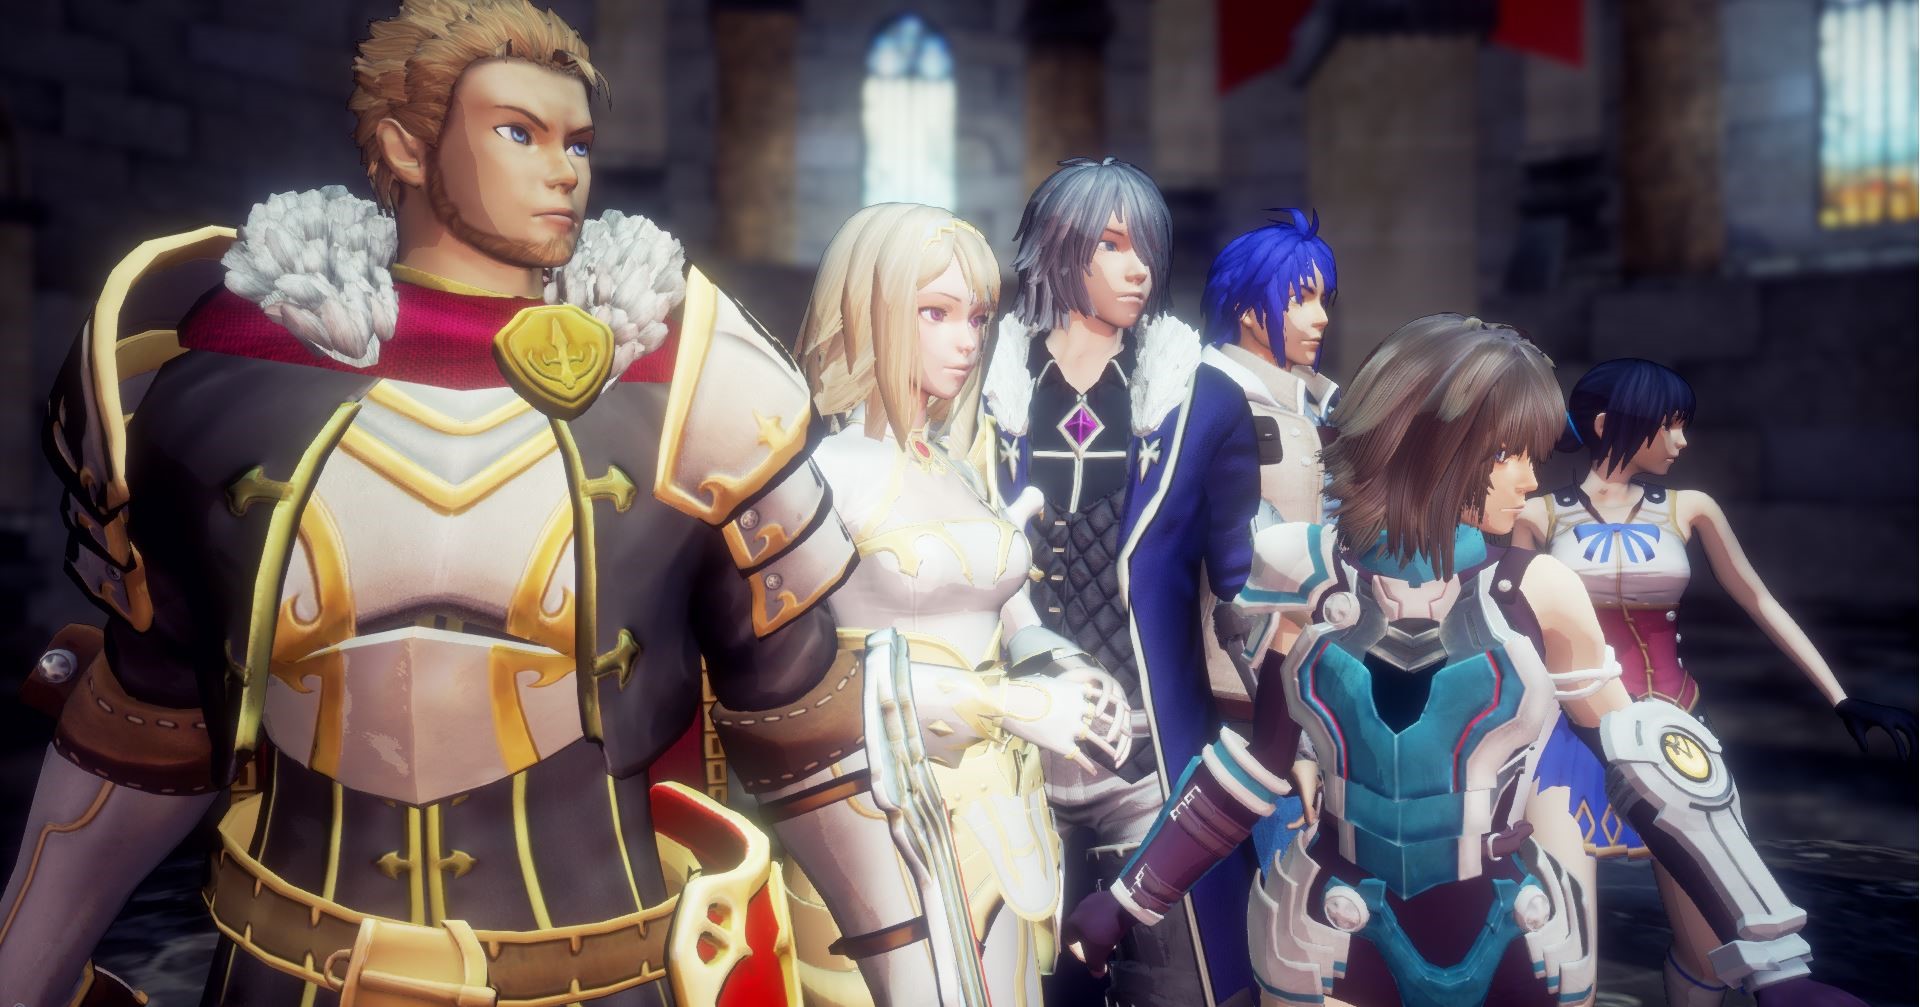 First Screenshots for AeternoBlade II Show Off New Art Direction